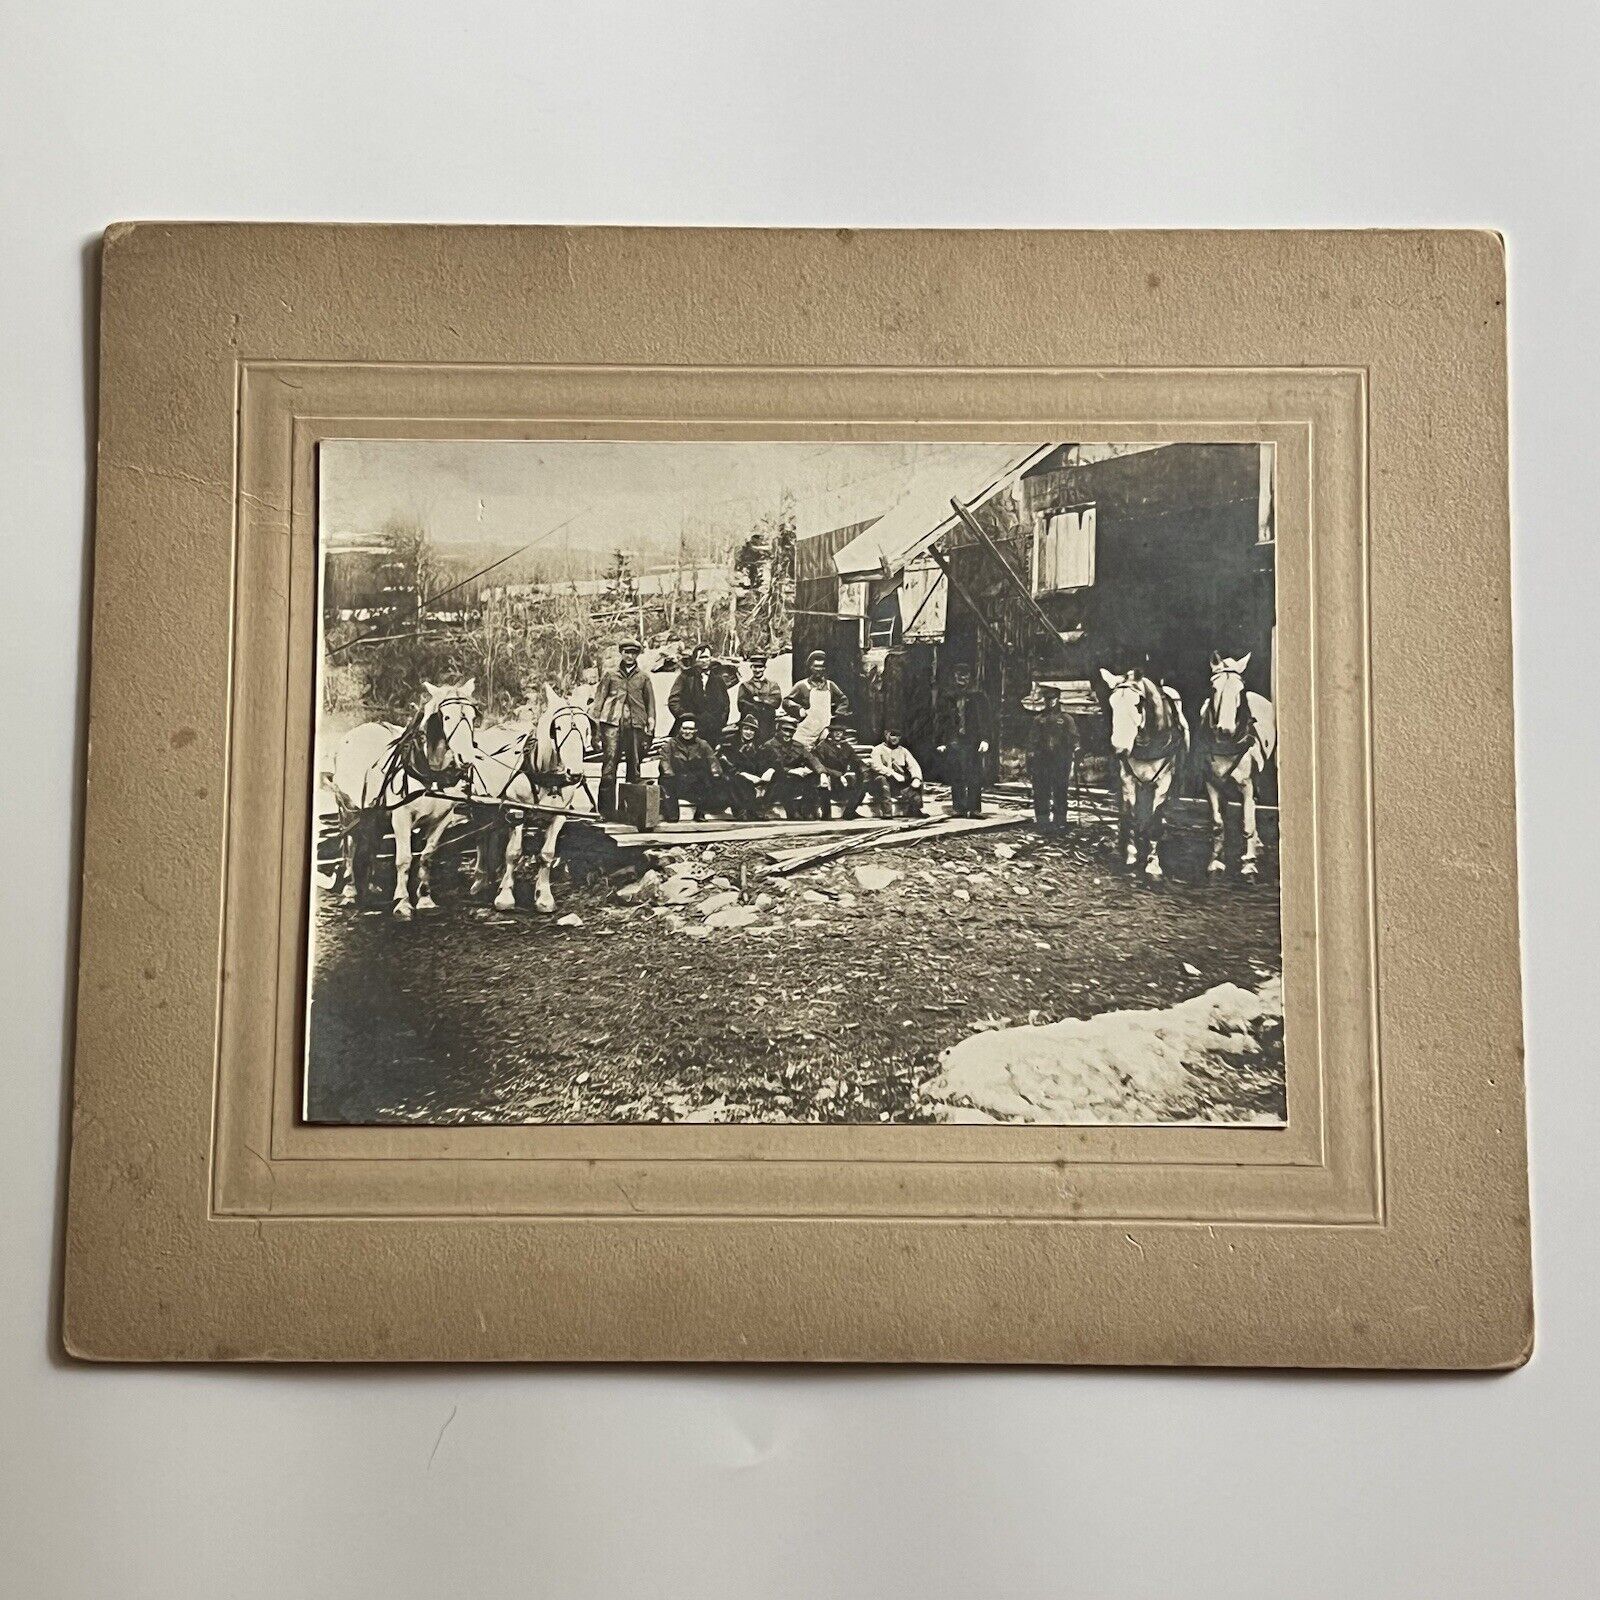 Antique Cabinet Card Photograph Barn Working Men Horses Farm Everyday Life